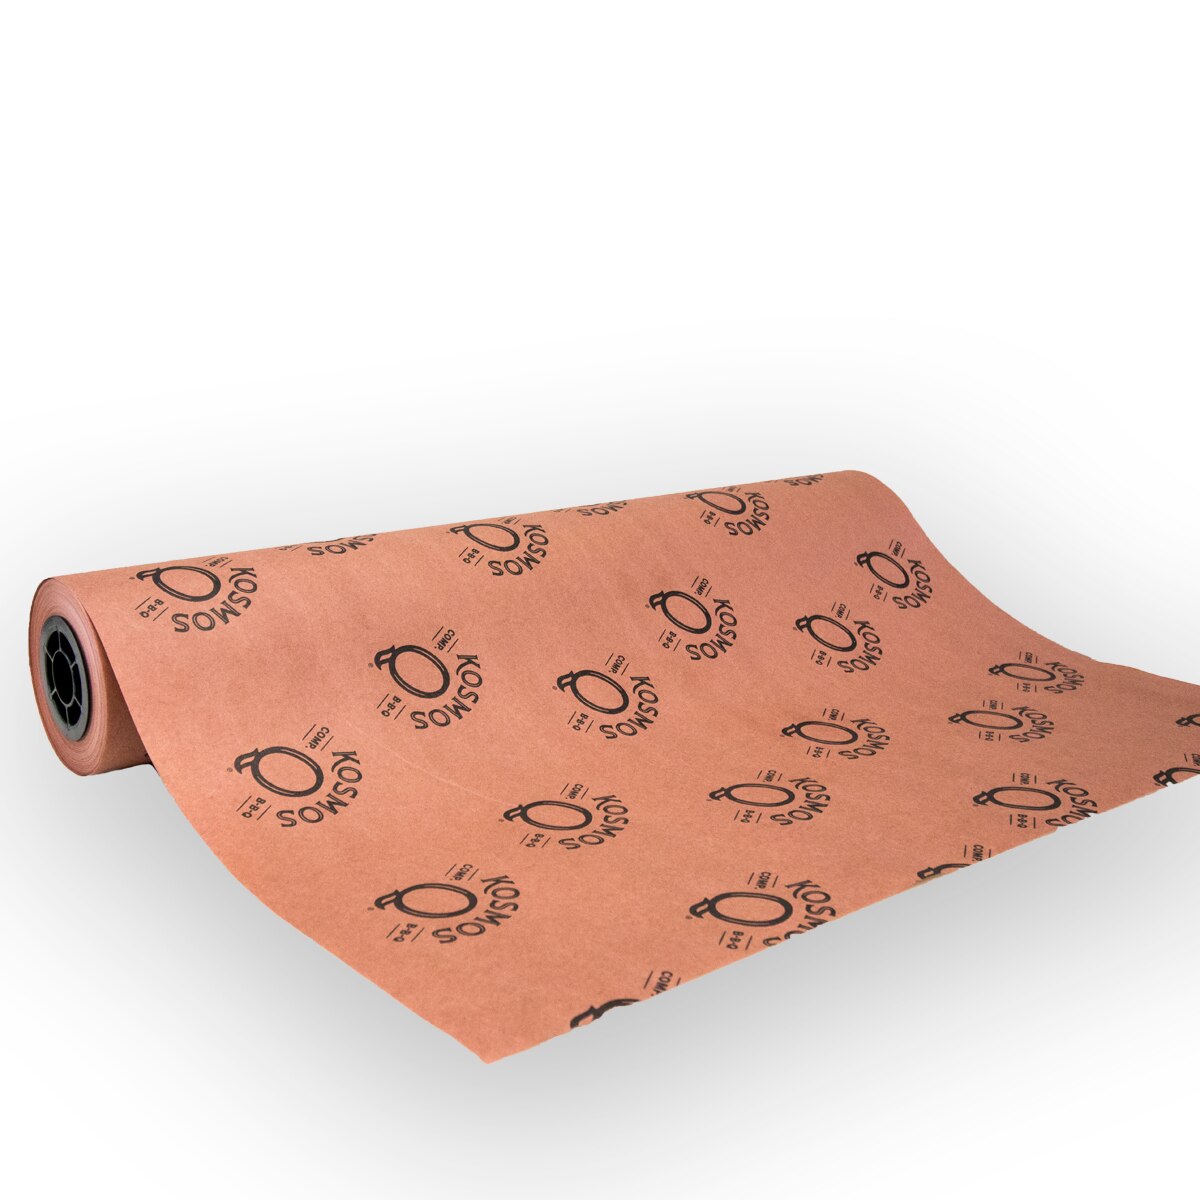 Product Review on our Pink Butcher Paper 